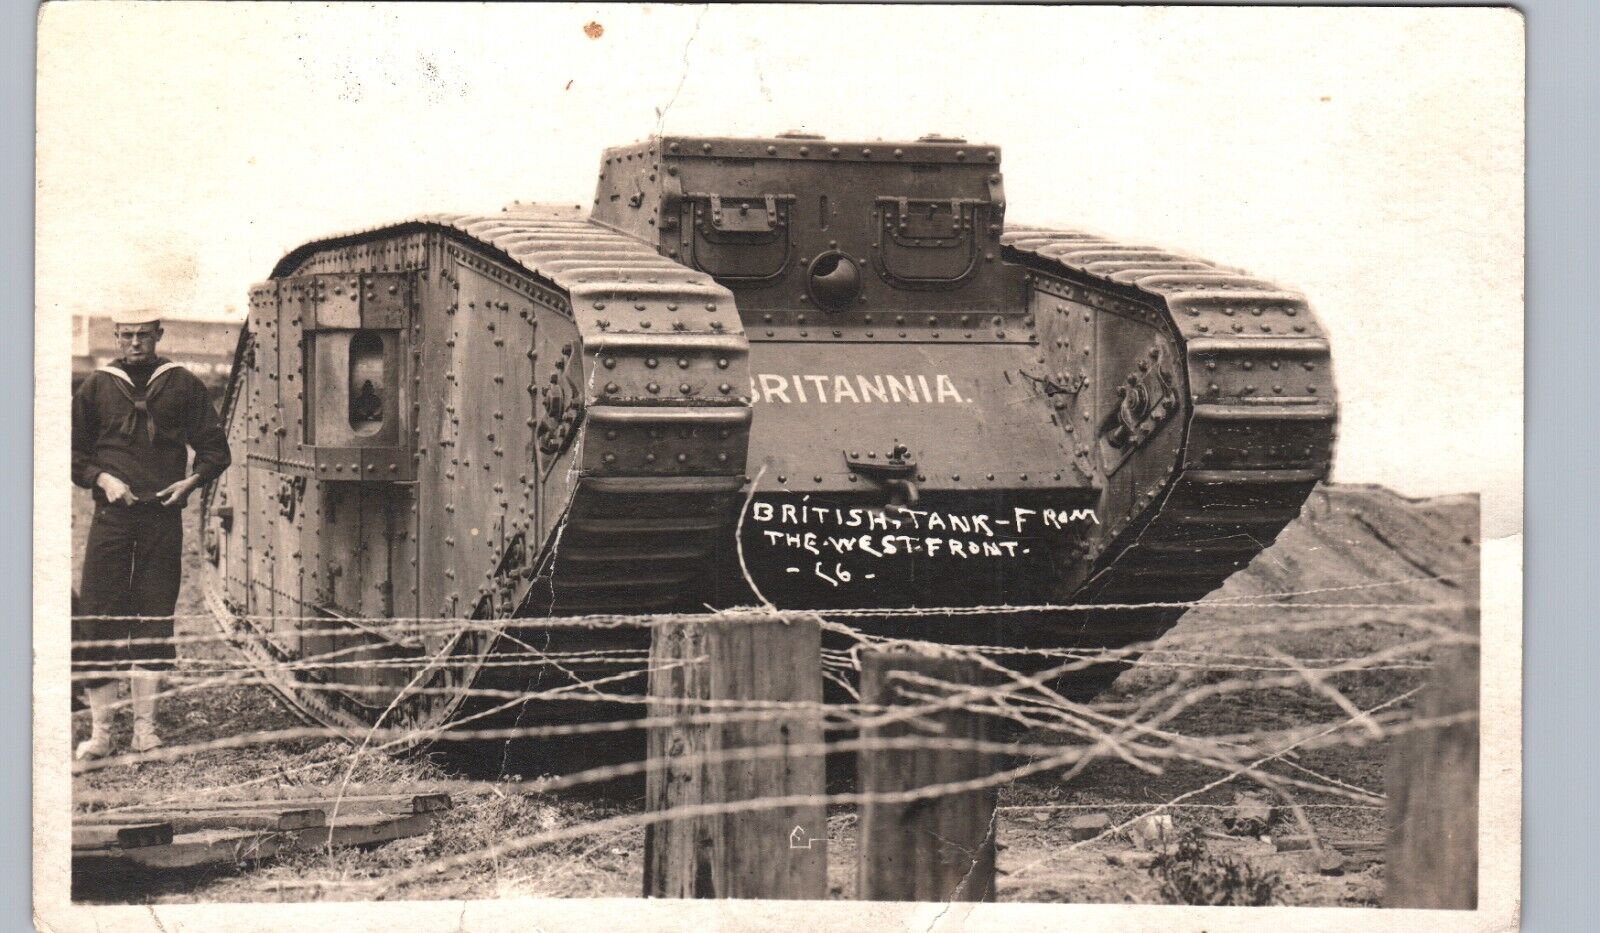 BRITISH TANK FROM WEST FRONT WW1 real photo postcard rppc britannia ~CREASED